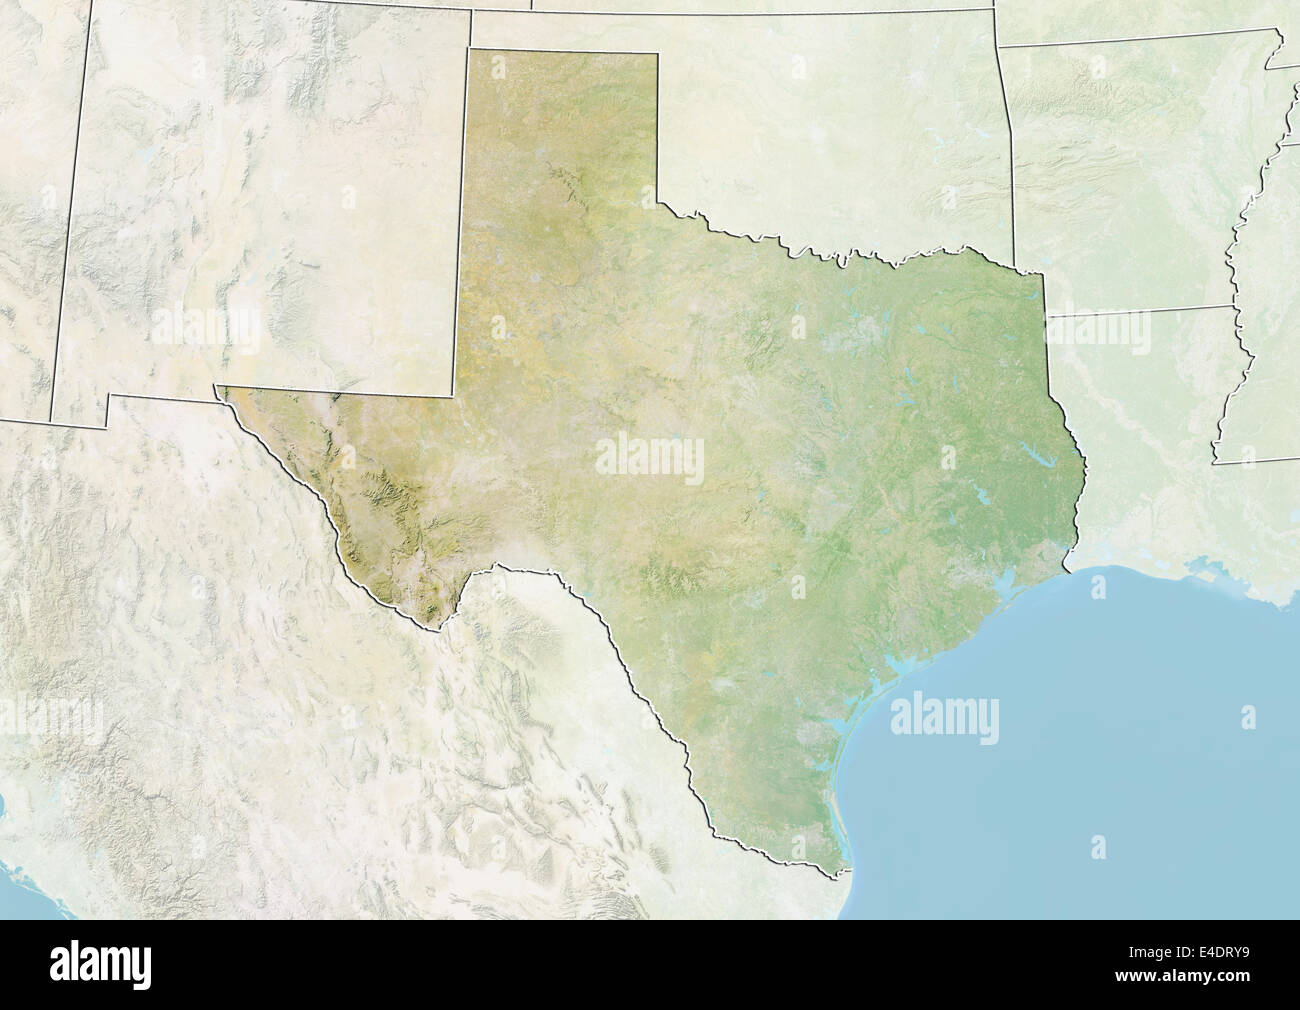 State of Texas, United States, Relief Map Stock Photo